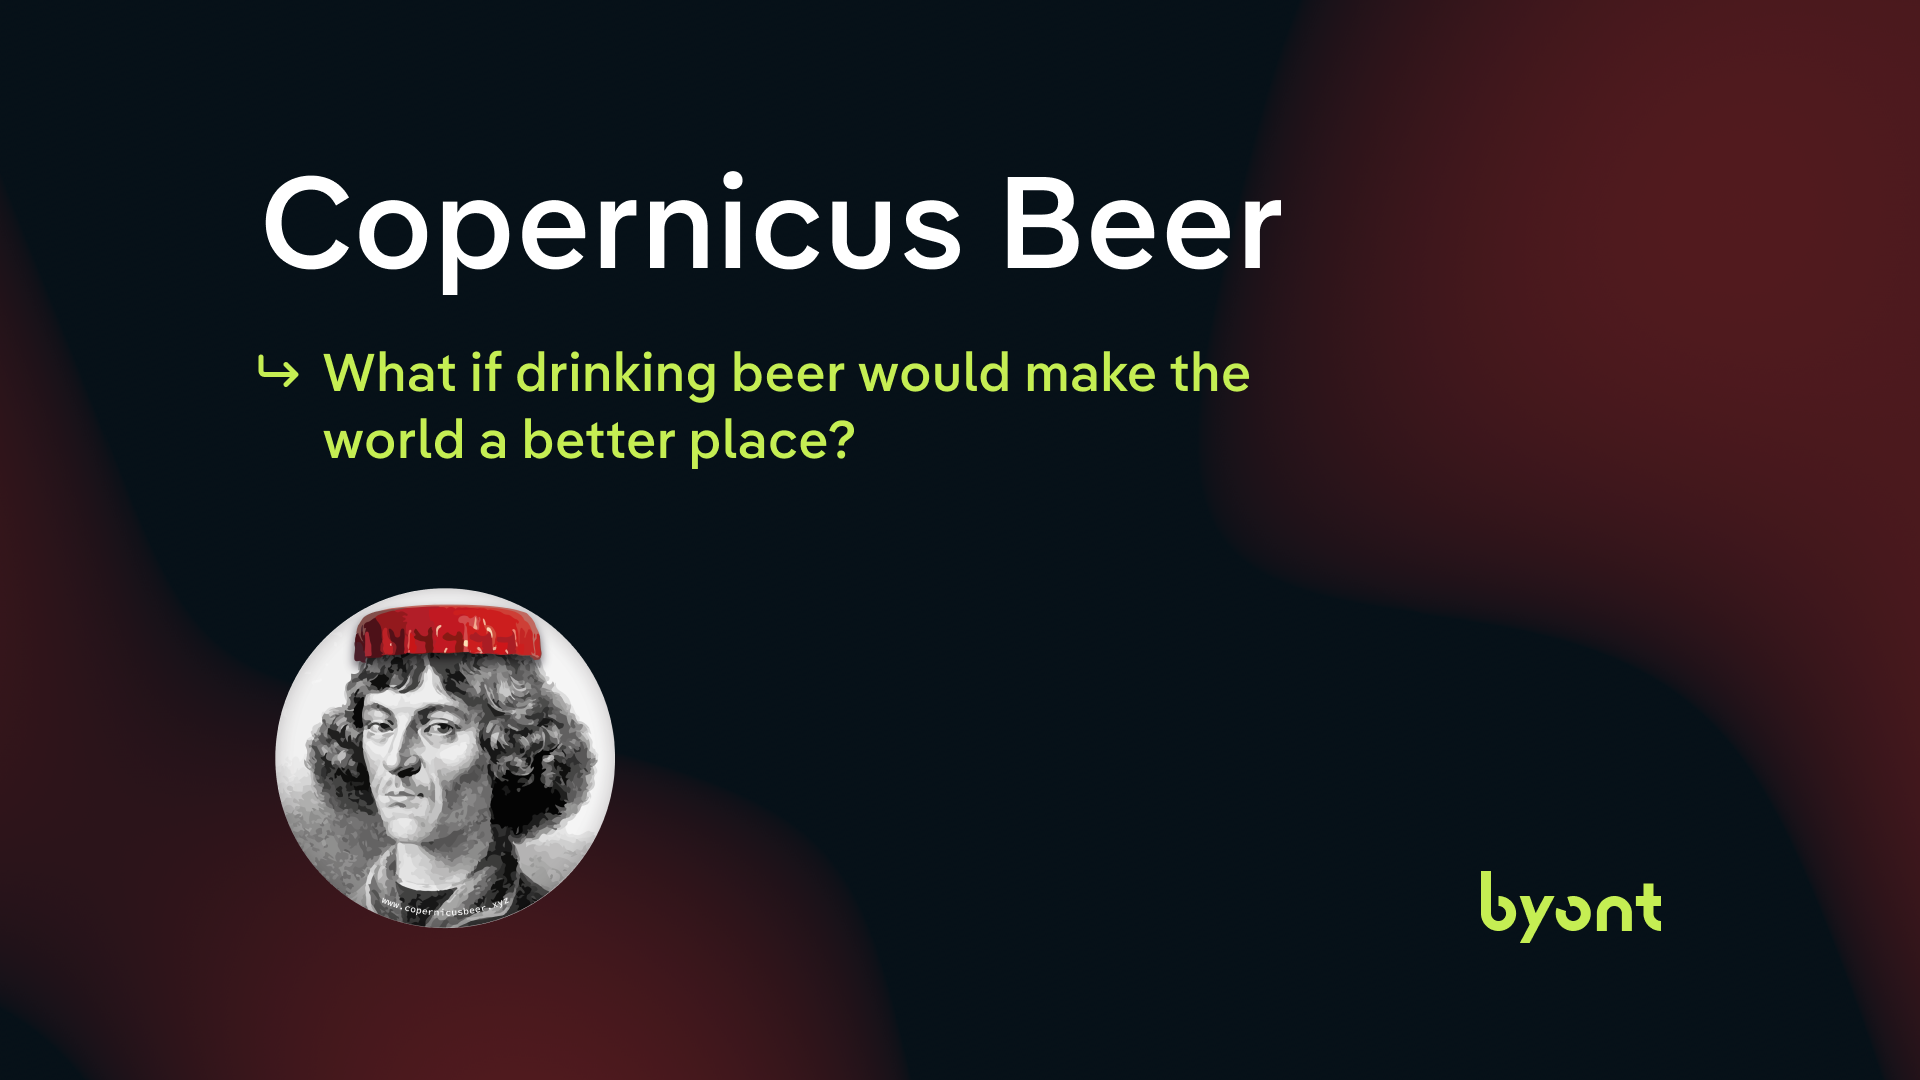 We joined the Copernicus Beer DAO